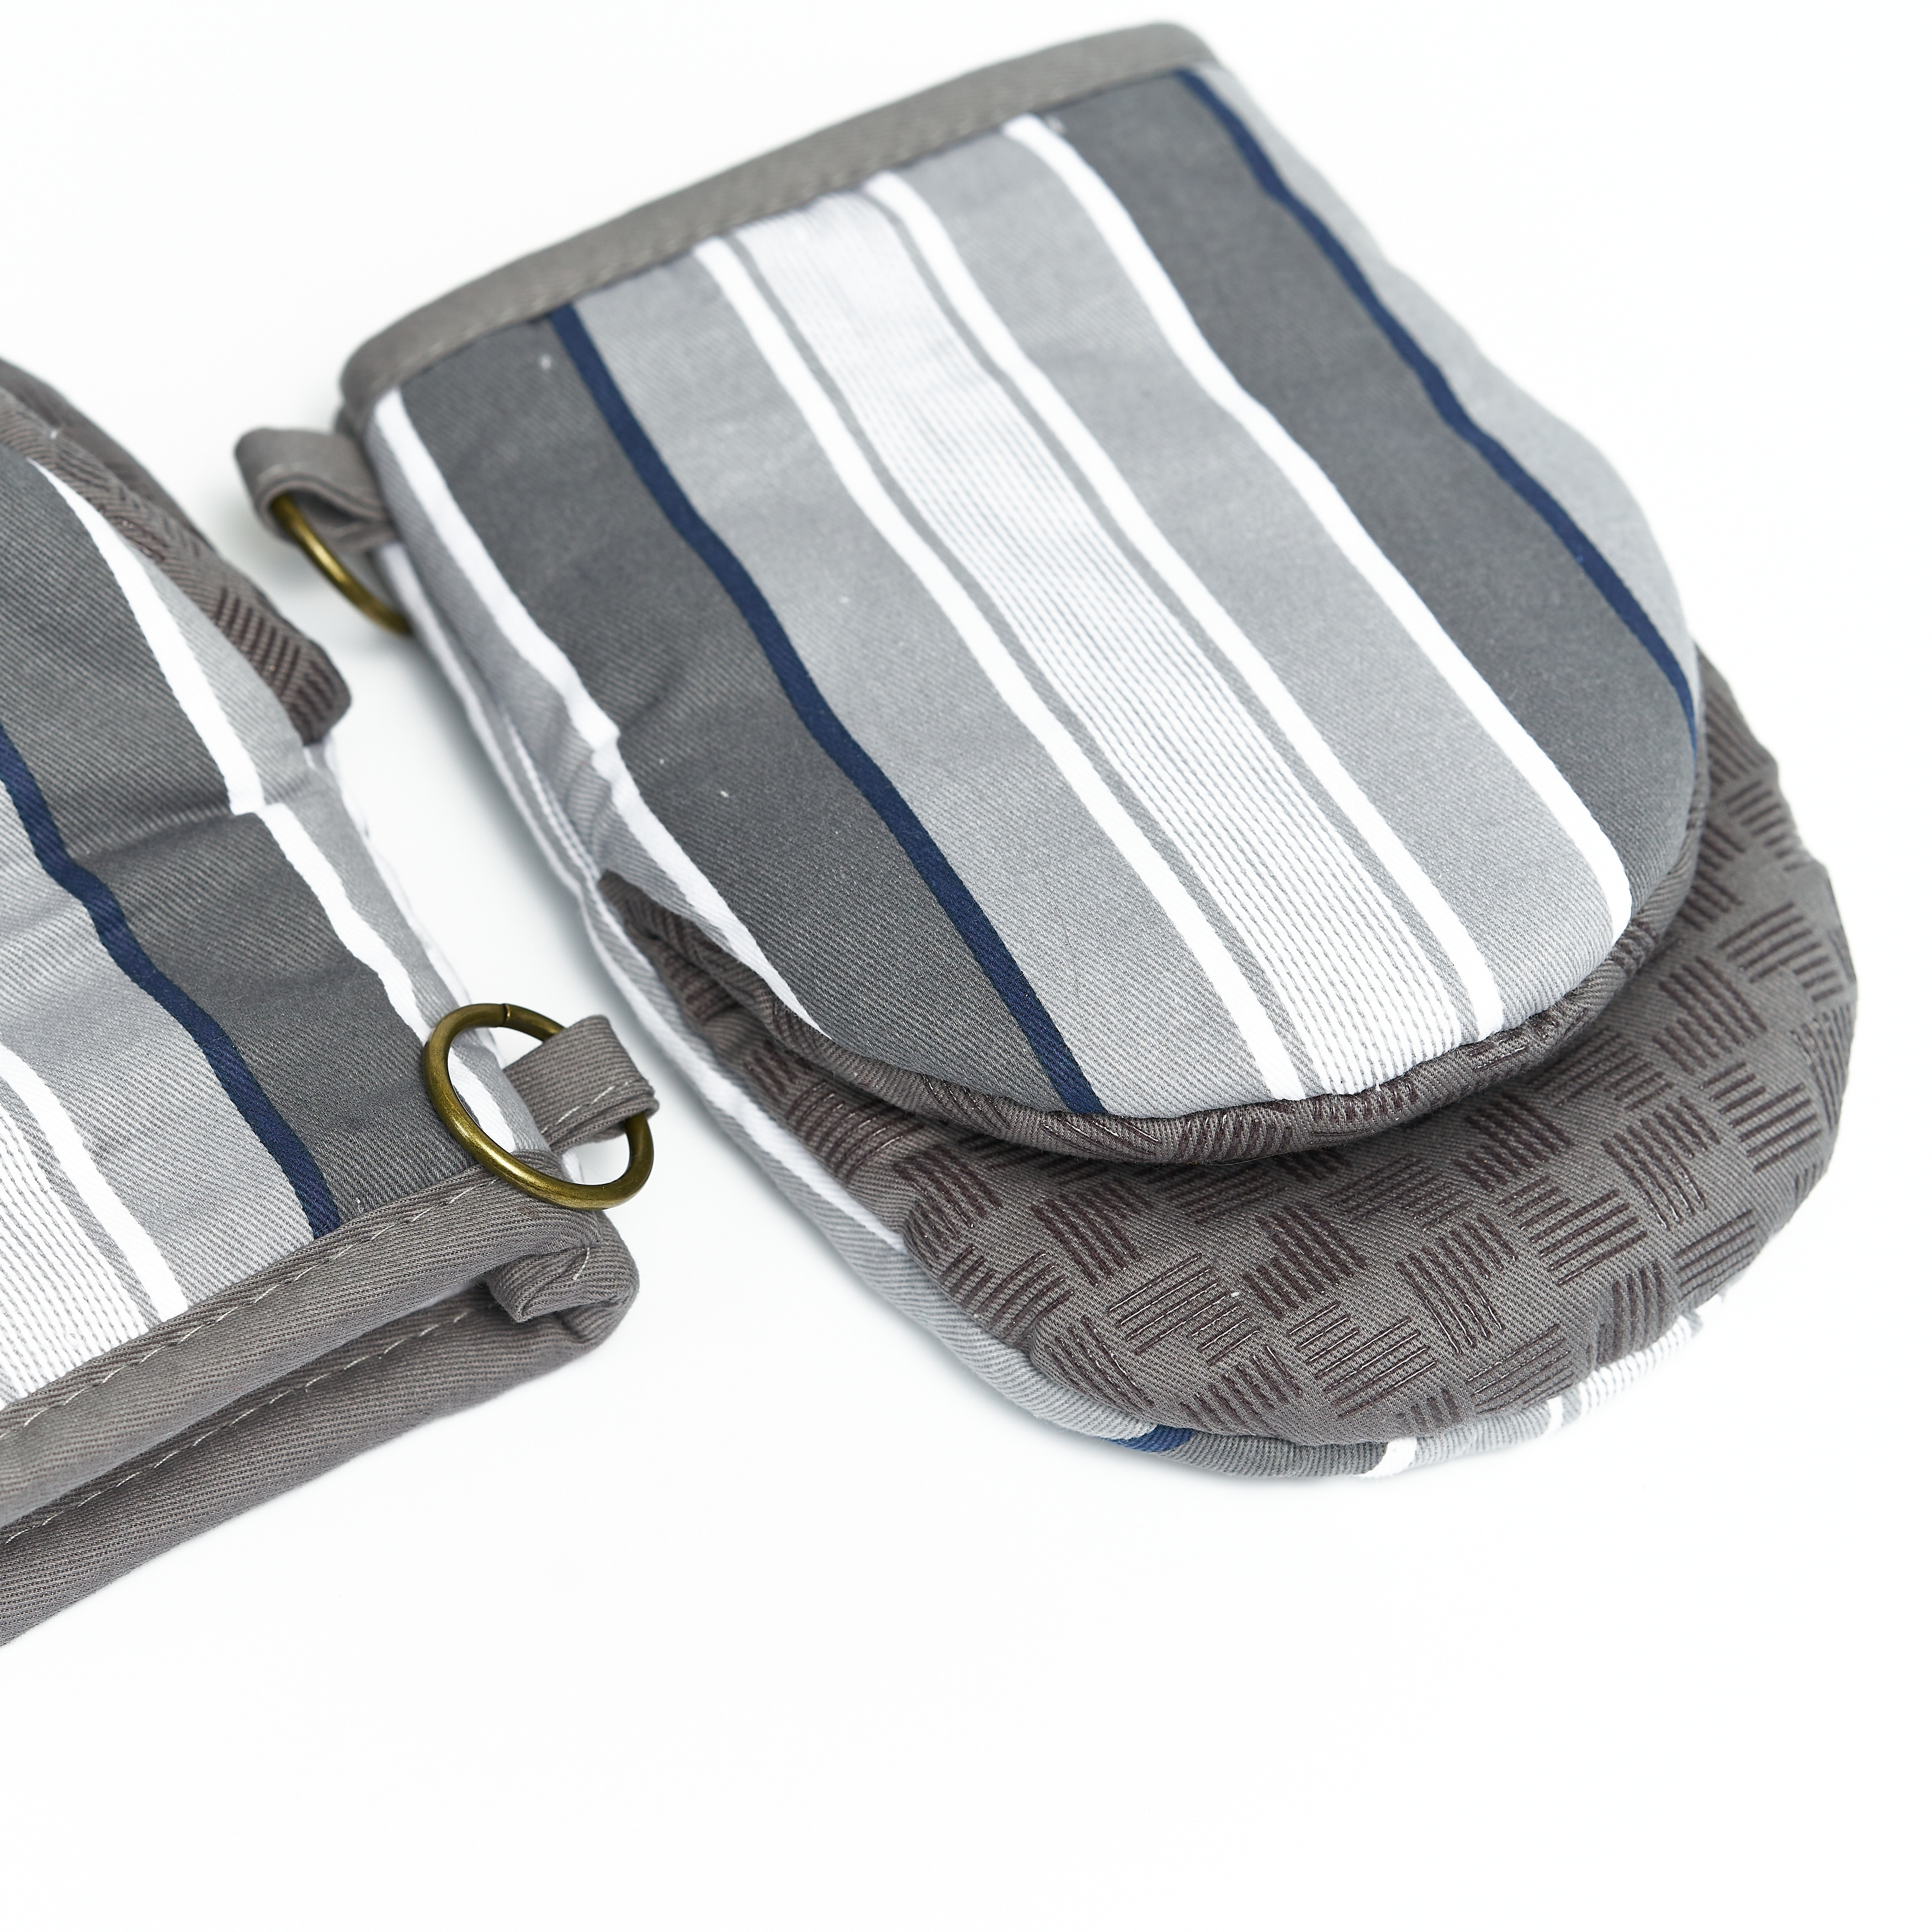 https://ak1.ostkcdn.com/images/products/is/images/direct/036f31a1caca866391691778b0623872648b83e2/Nautica-Home-Grey-Multi-Stripe-100%25-Cotton-Mini-Oven-Mitt-With-Silicone-Palm-%28Set-of-2%29.jpg